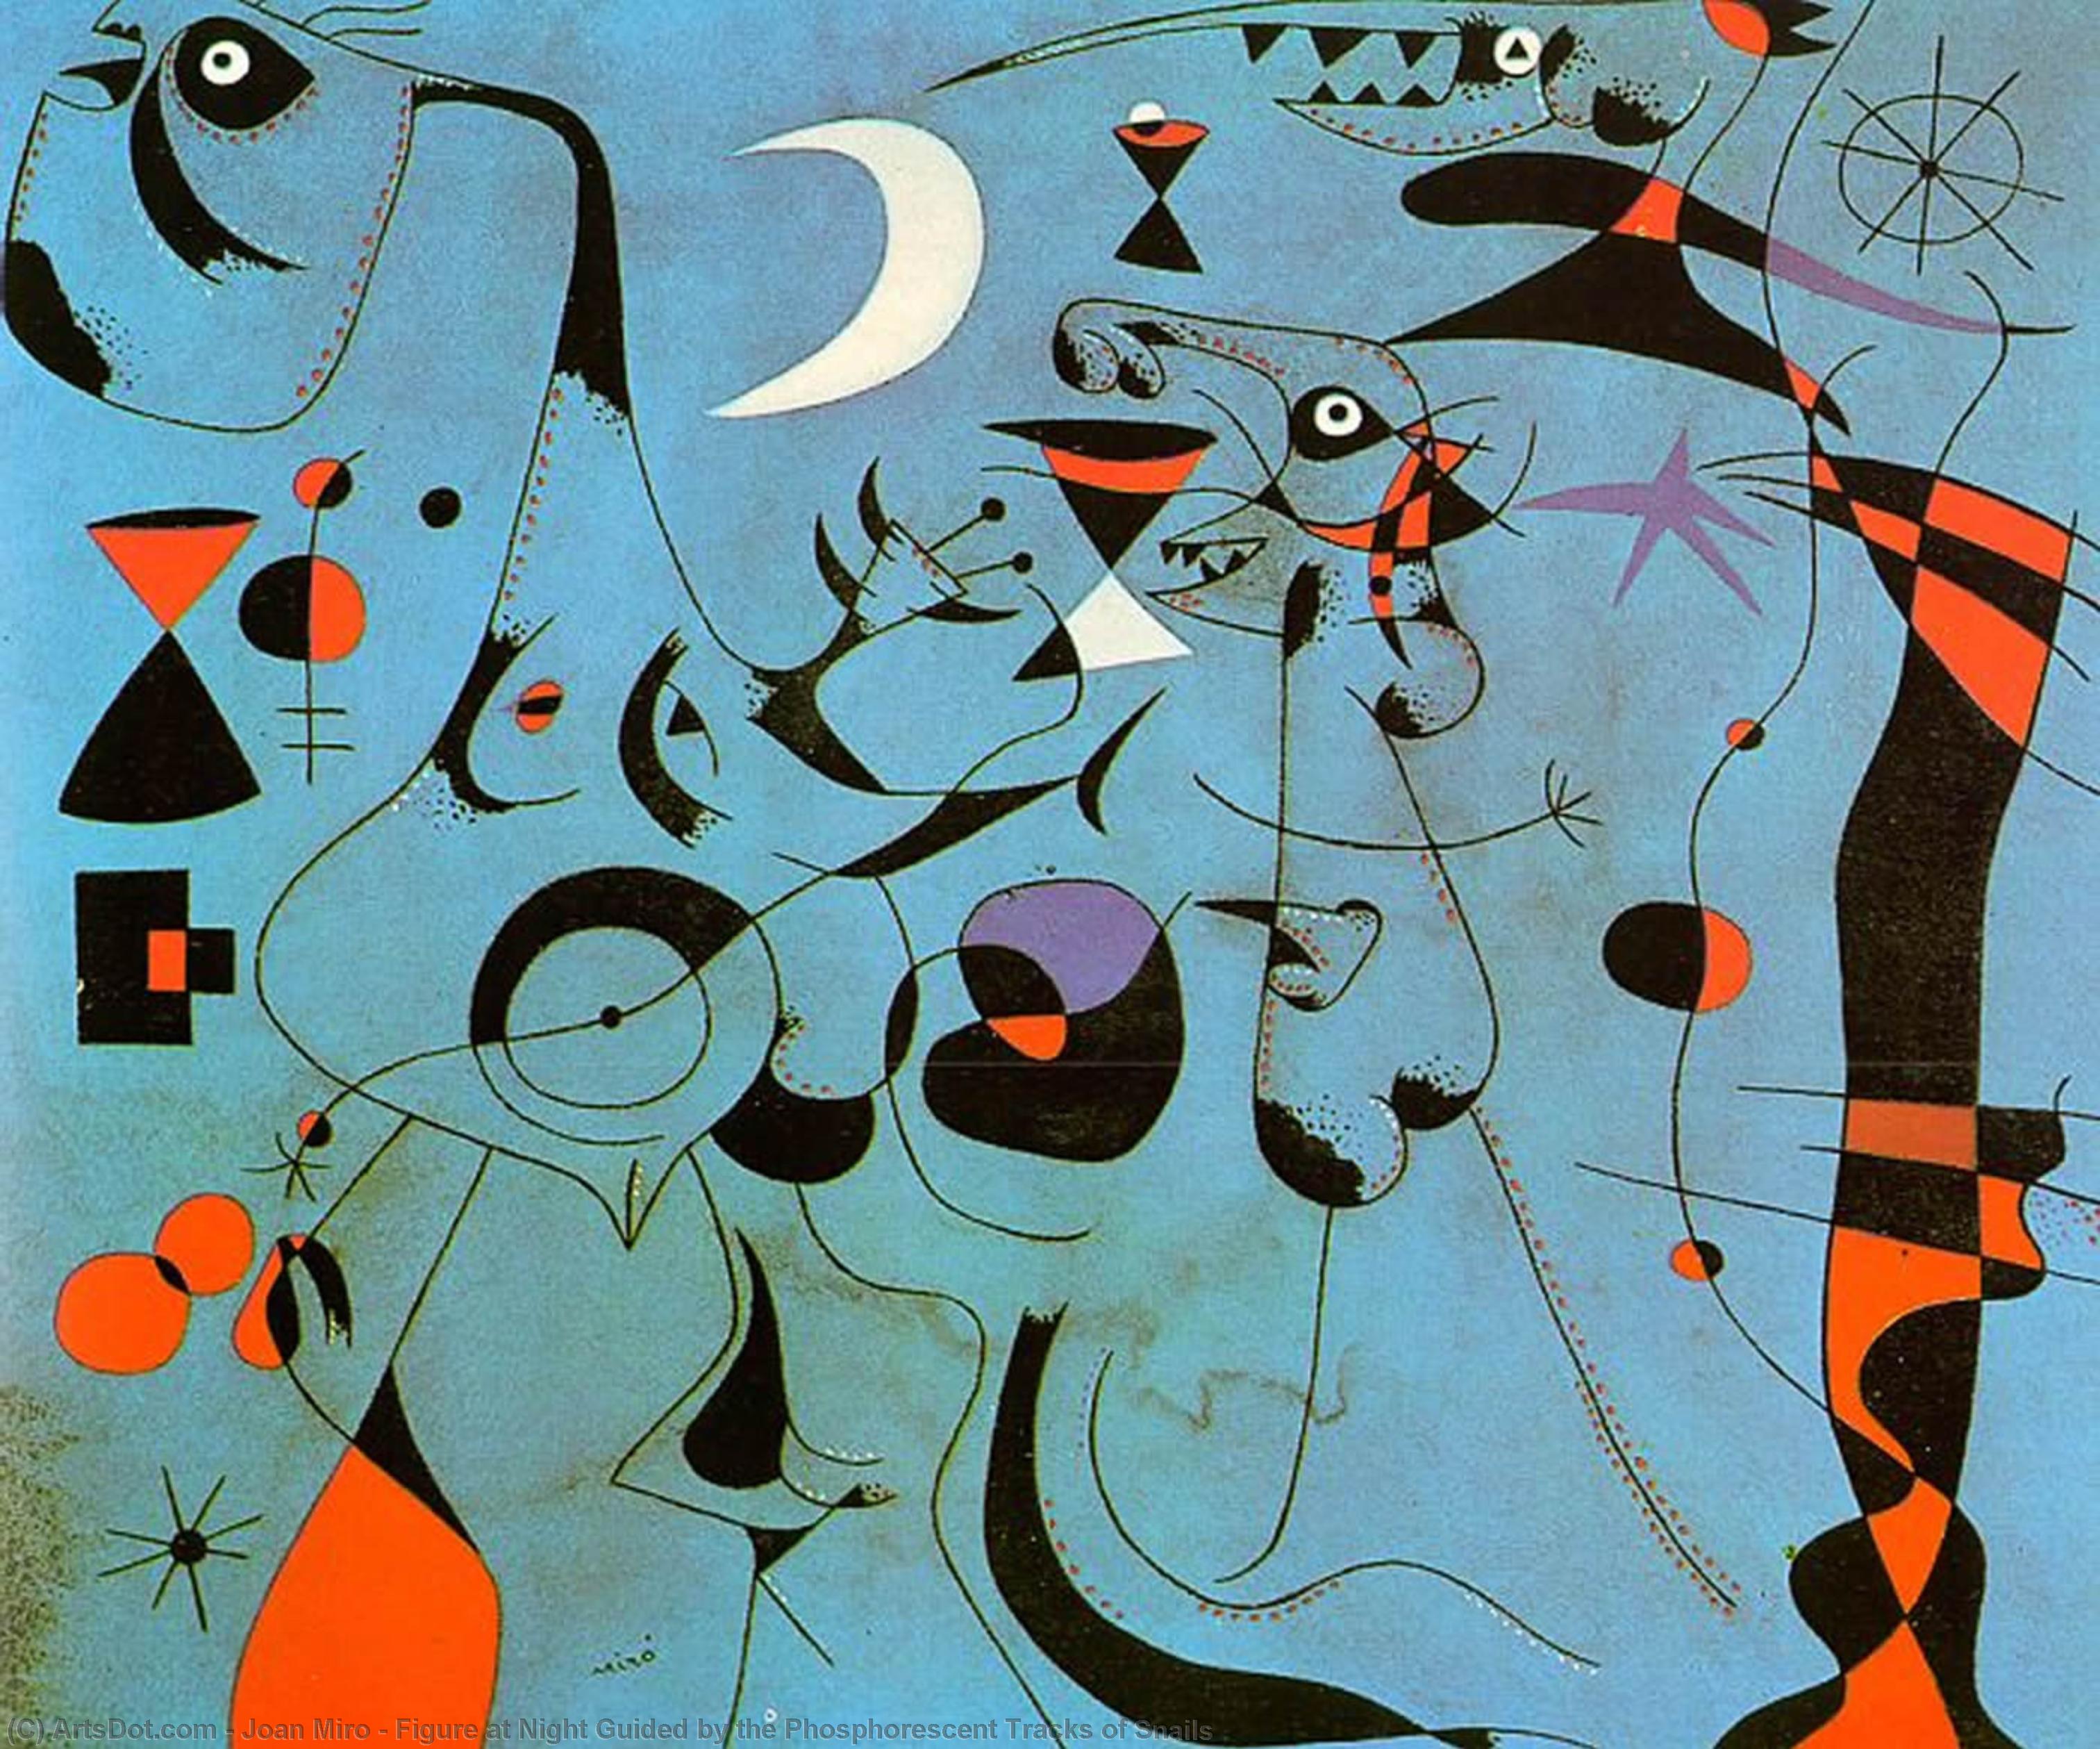 Wikioo.org - สารานุกรมวิจิตรศิลป์ - จิตรกรรม Joan Miro - Figure at Night Guided by the Phosphorescent Tracks of Snails